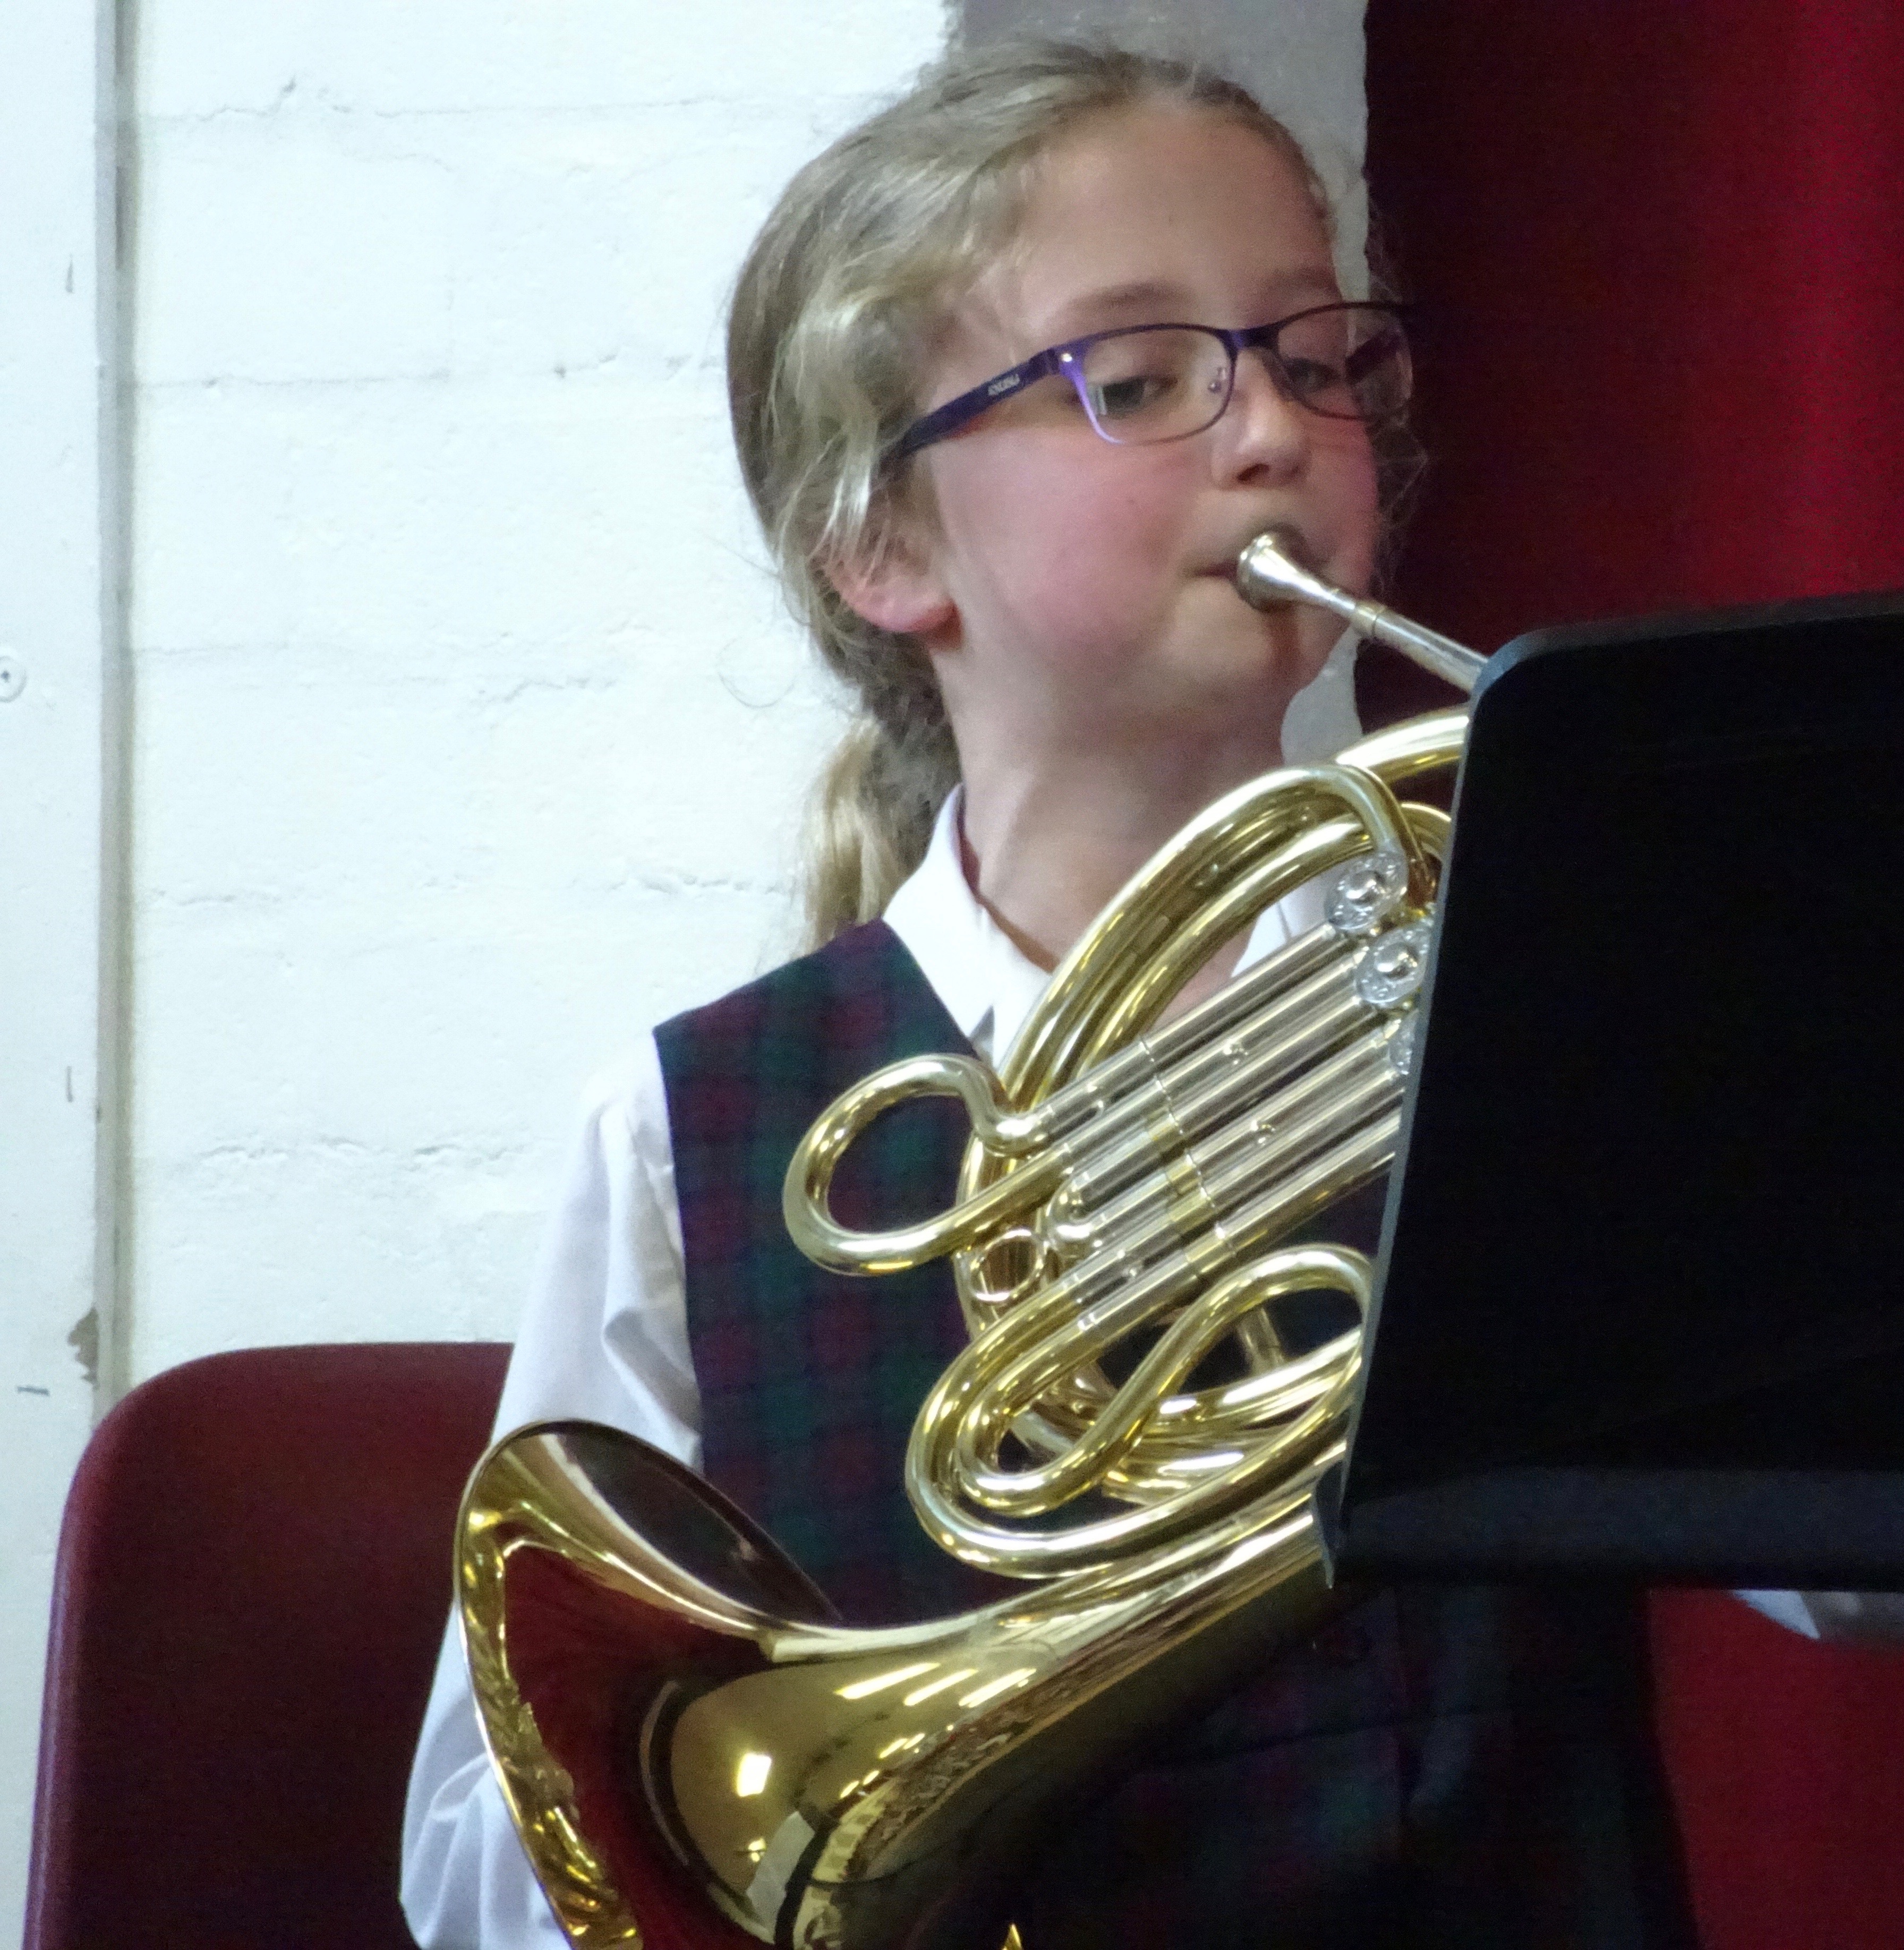 Years 3, 4 and 5 Music Competition - February 2016